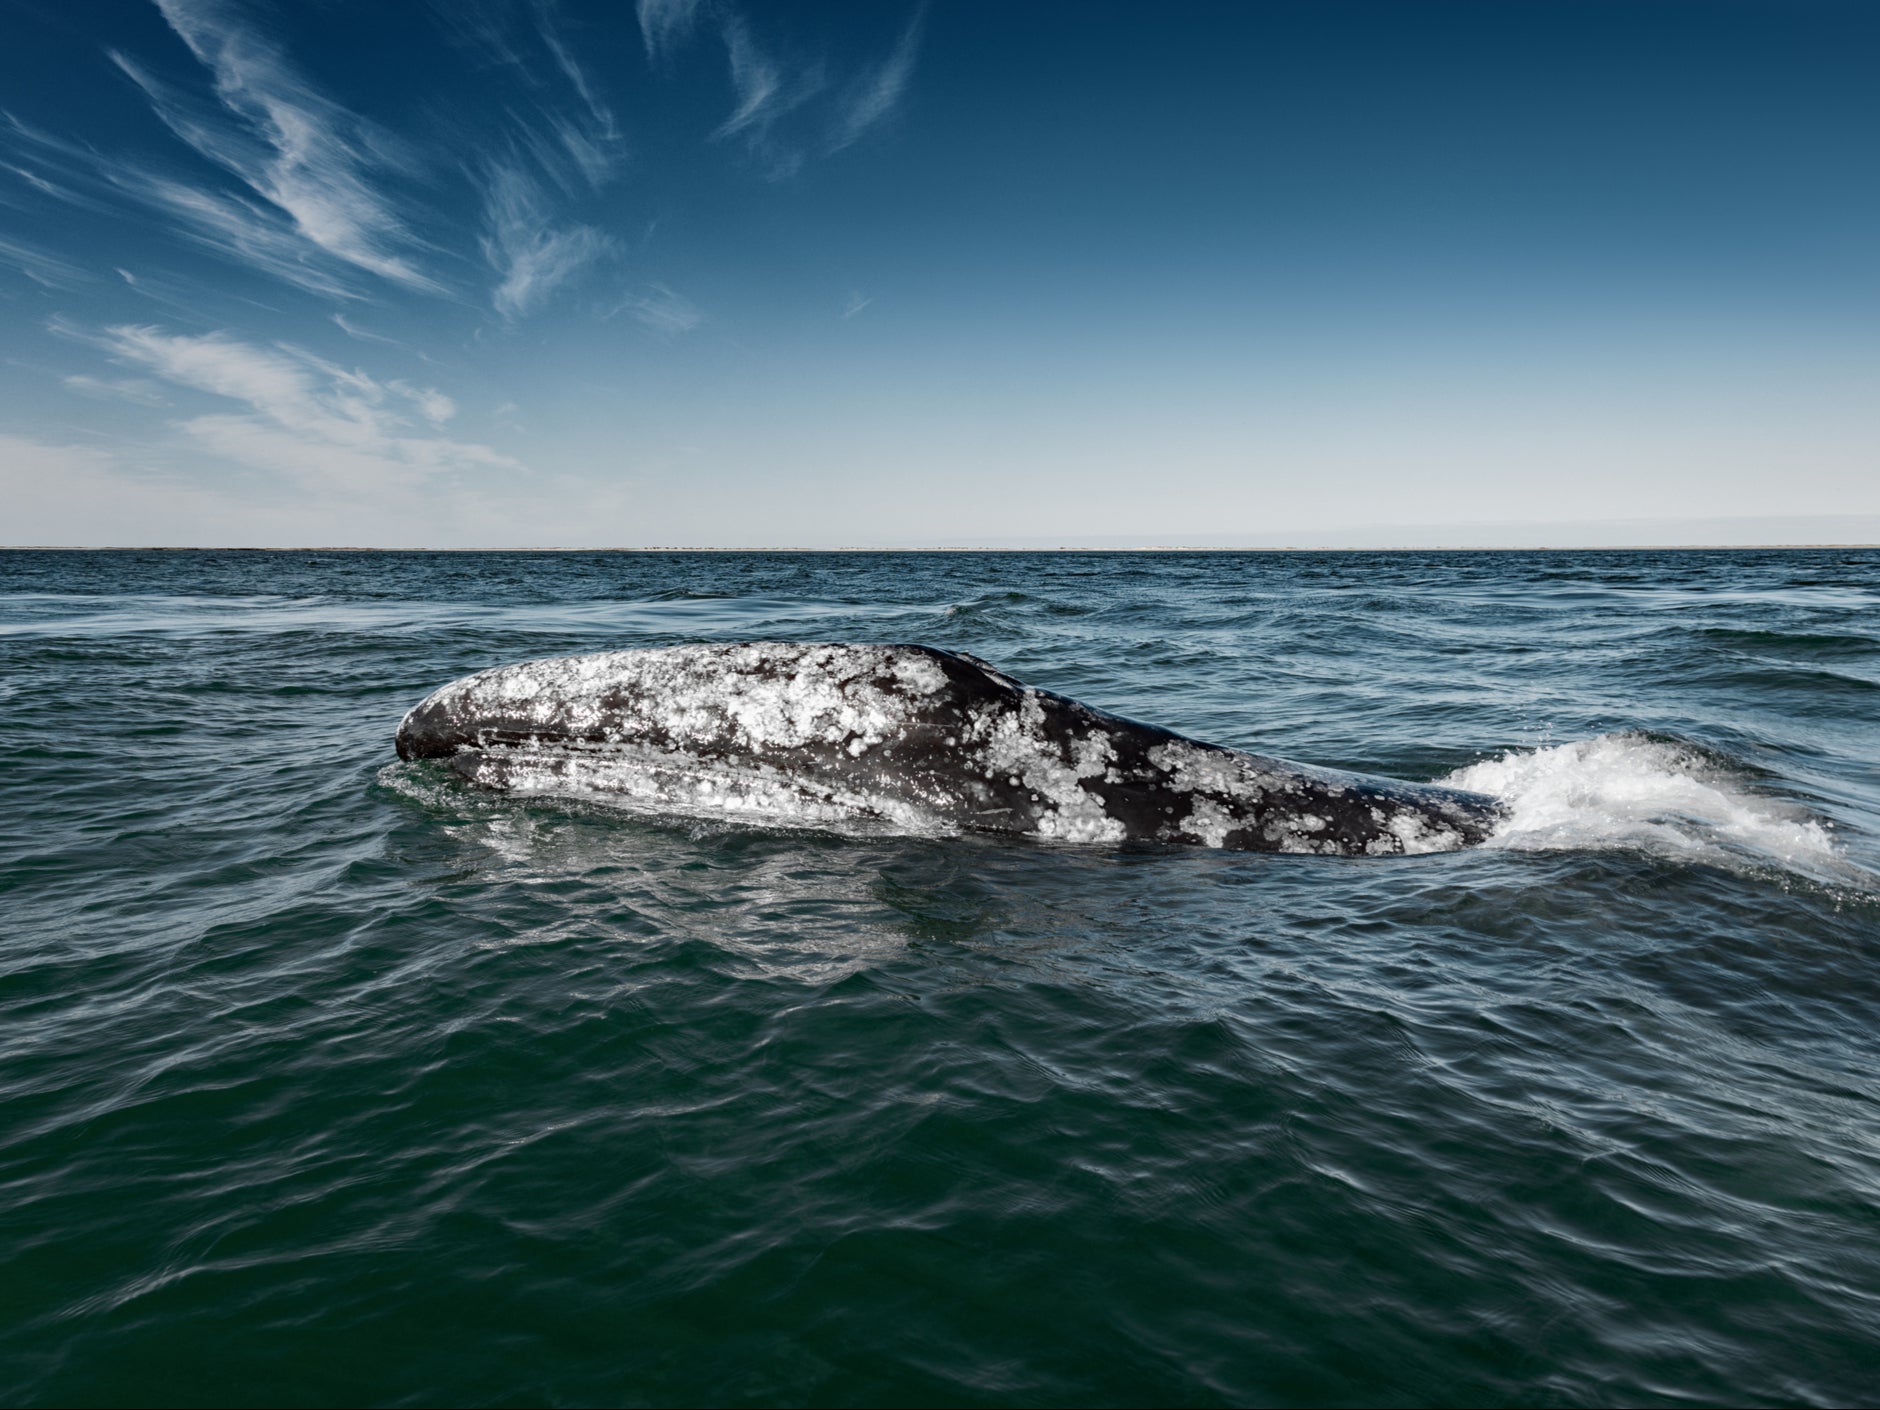 The grey whale was unexpectedly sighted off the coast of Namibia in 2013